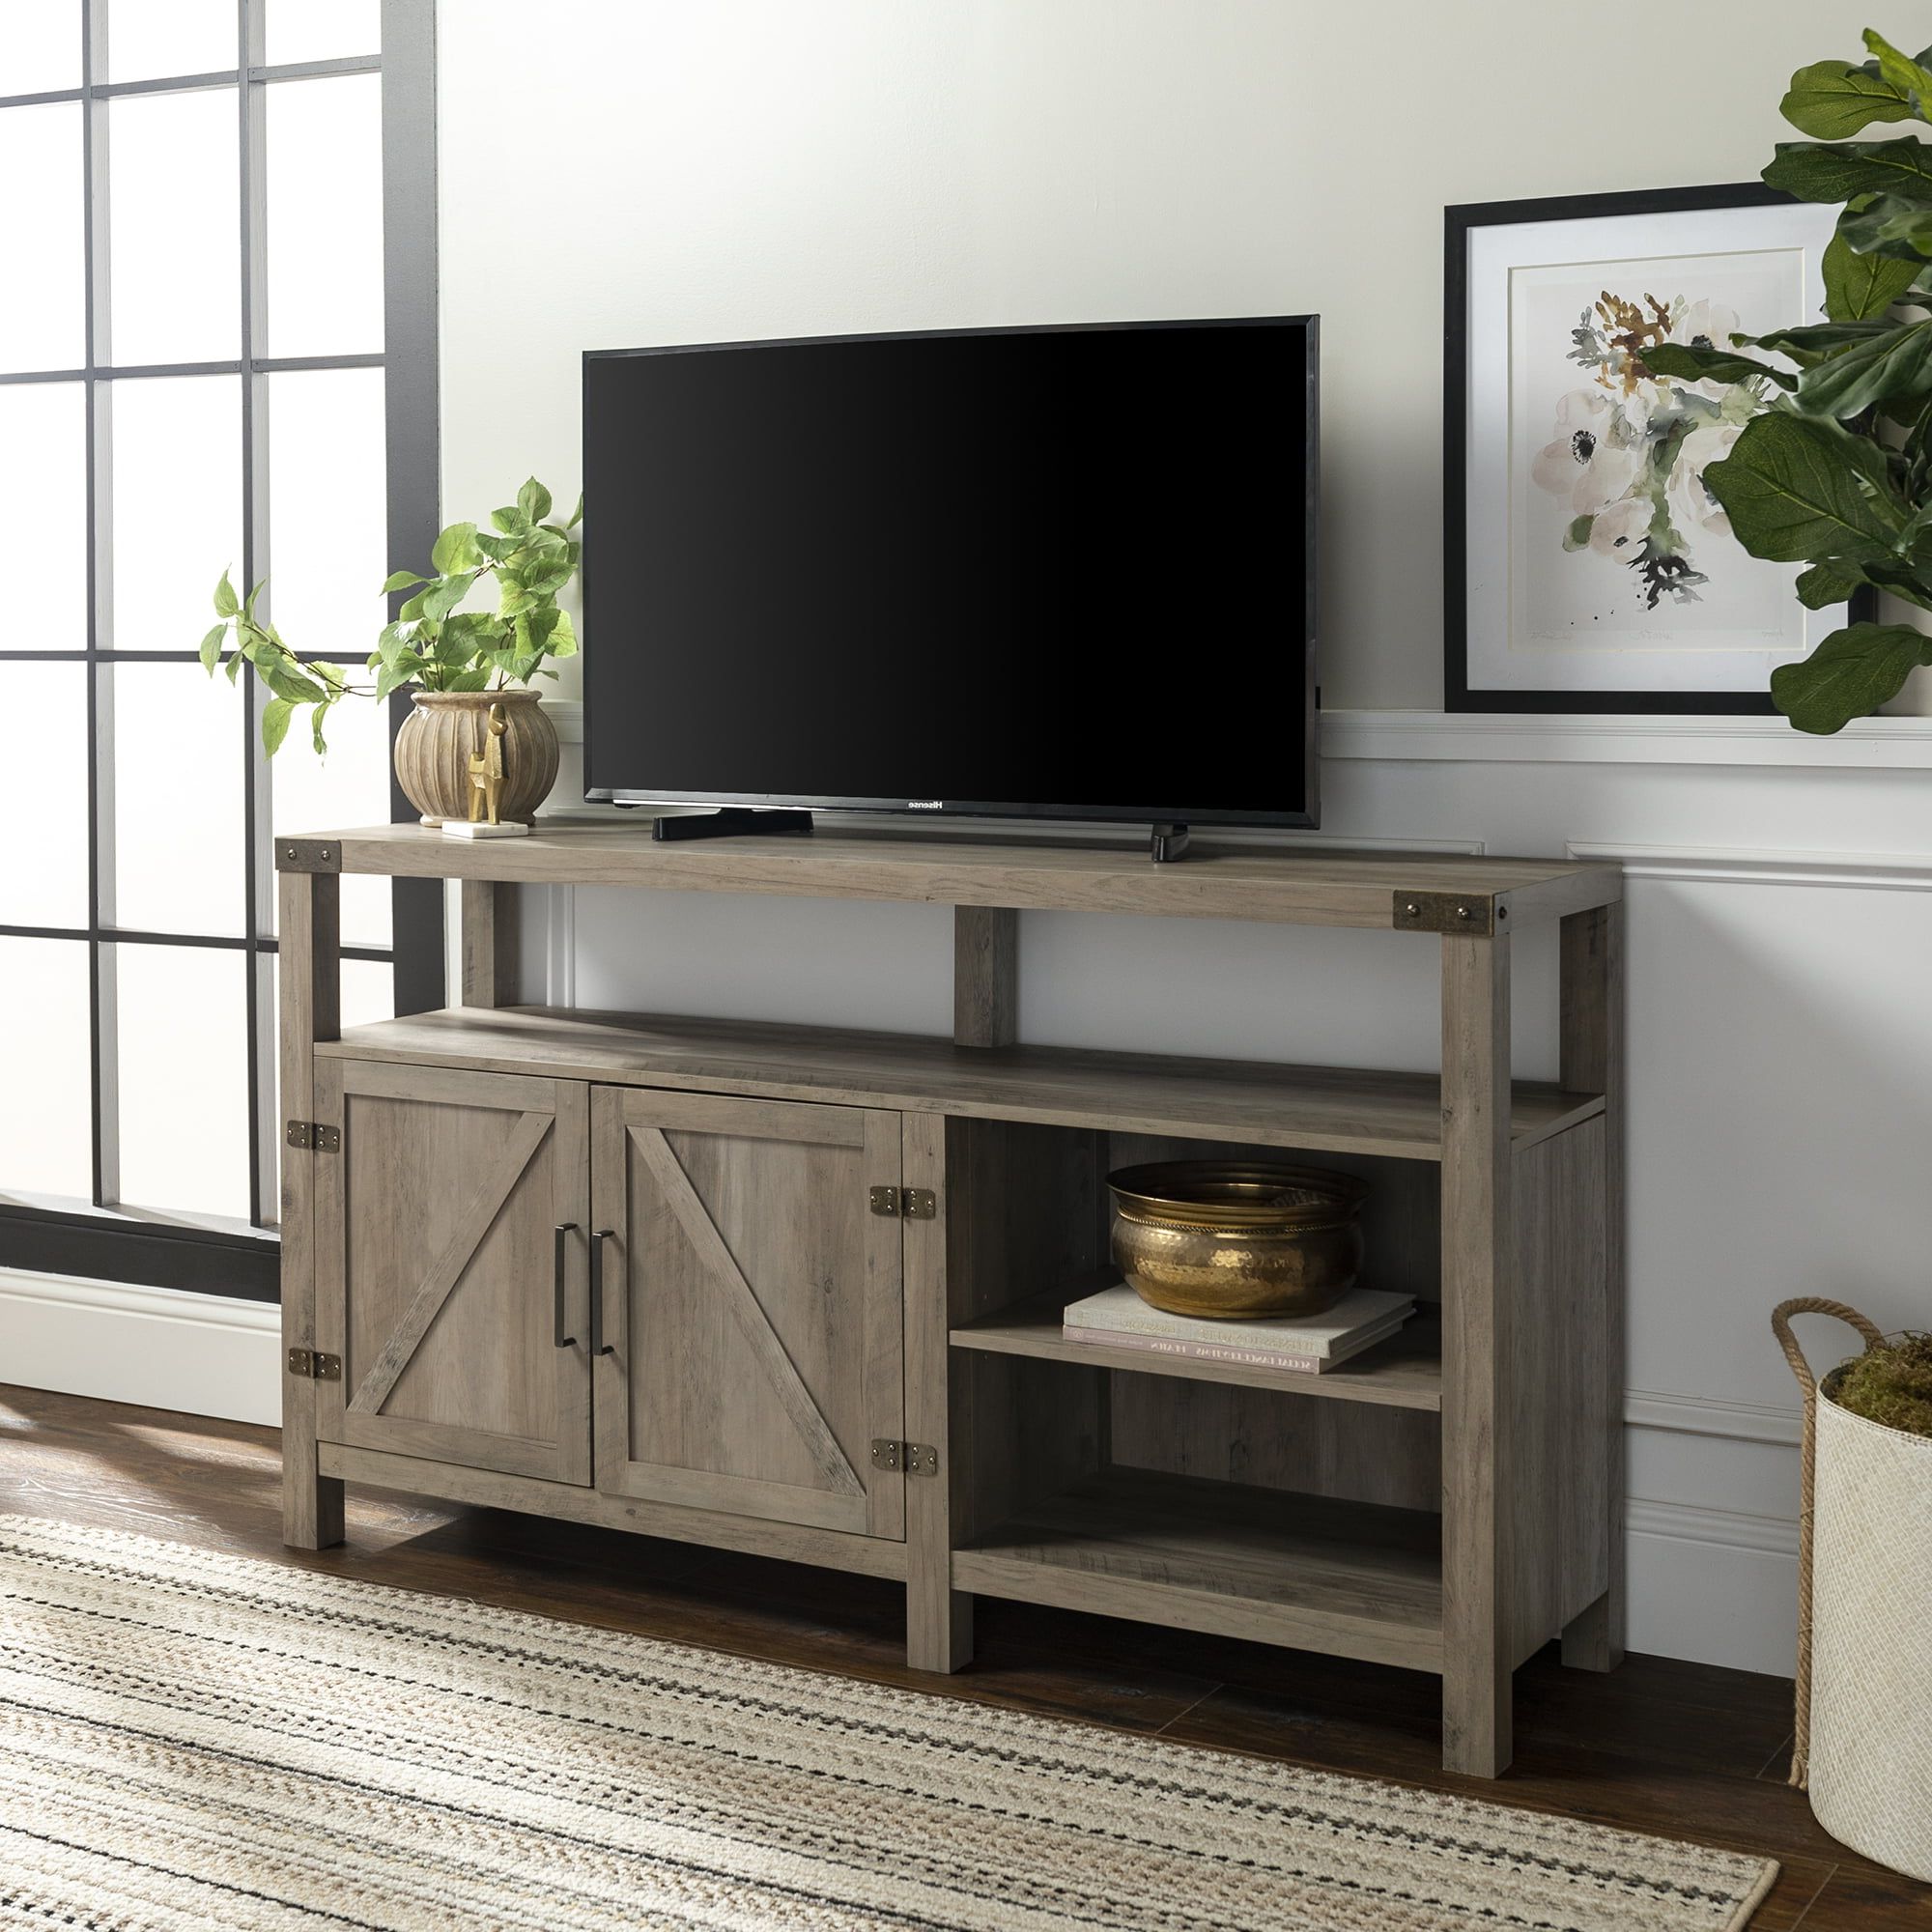 Farmhouse Stands For Tvs In Well Known Manor Park Modern Farmhouse Tall Barn Door Tv Stand For Tv's Up To 64 (Photo 1 of 15)